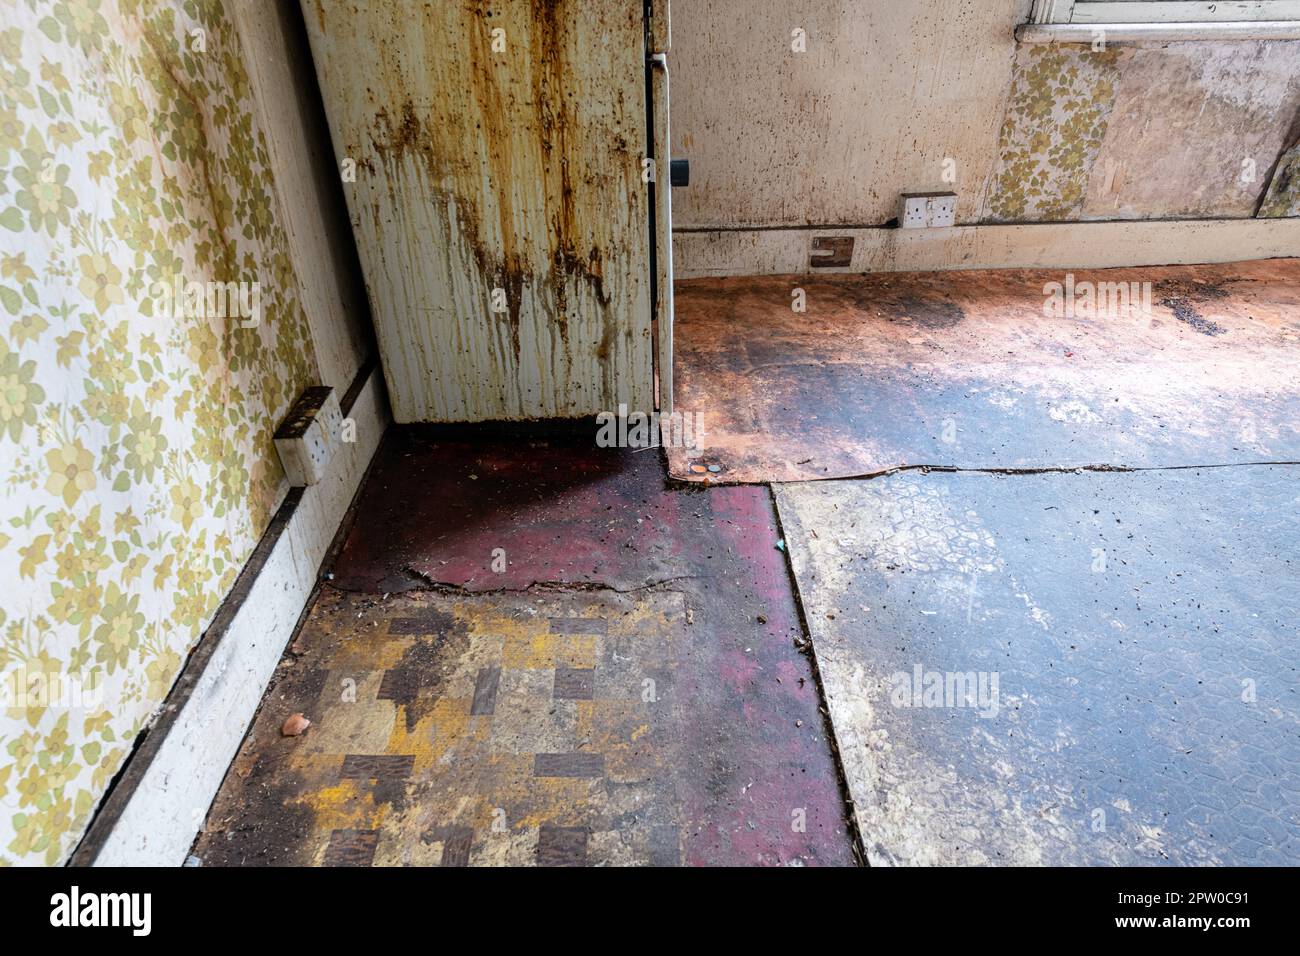 A filthy floor and cooker in an unmodernised house in South London. Stock Photo